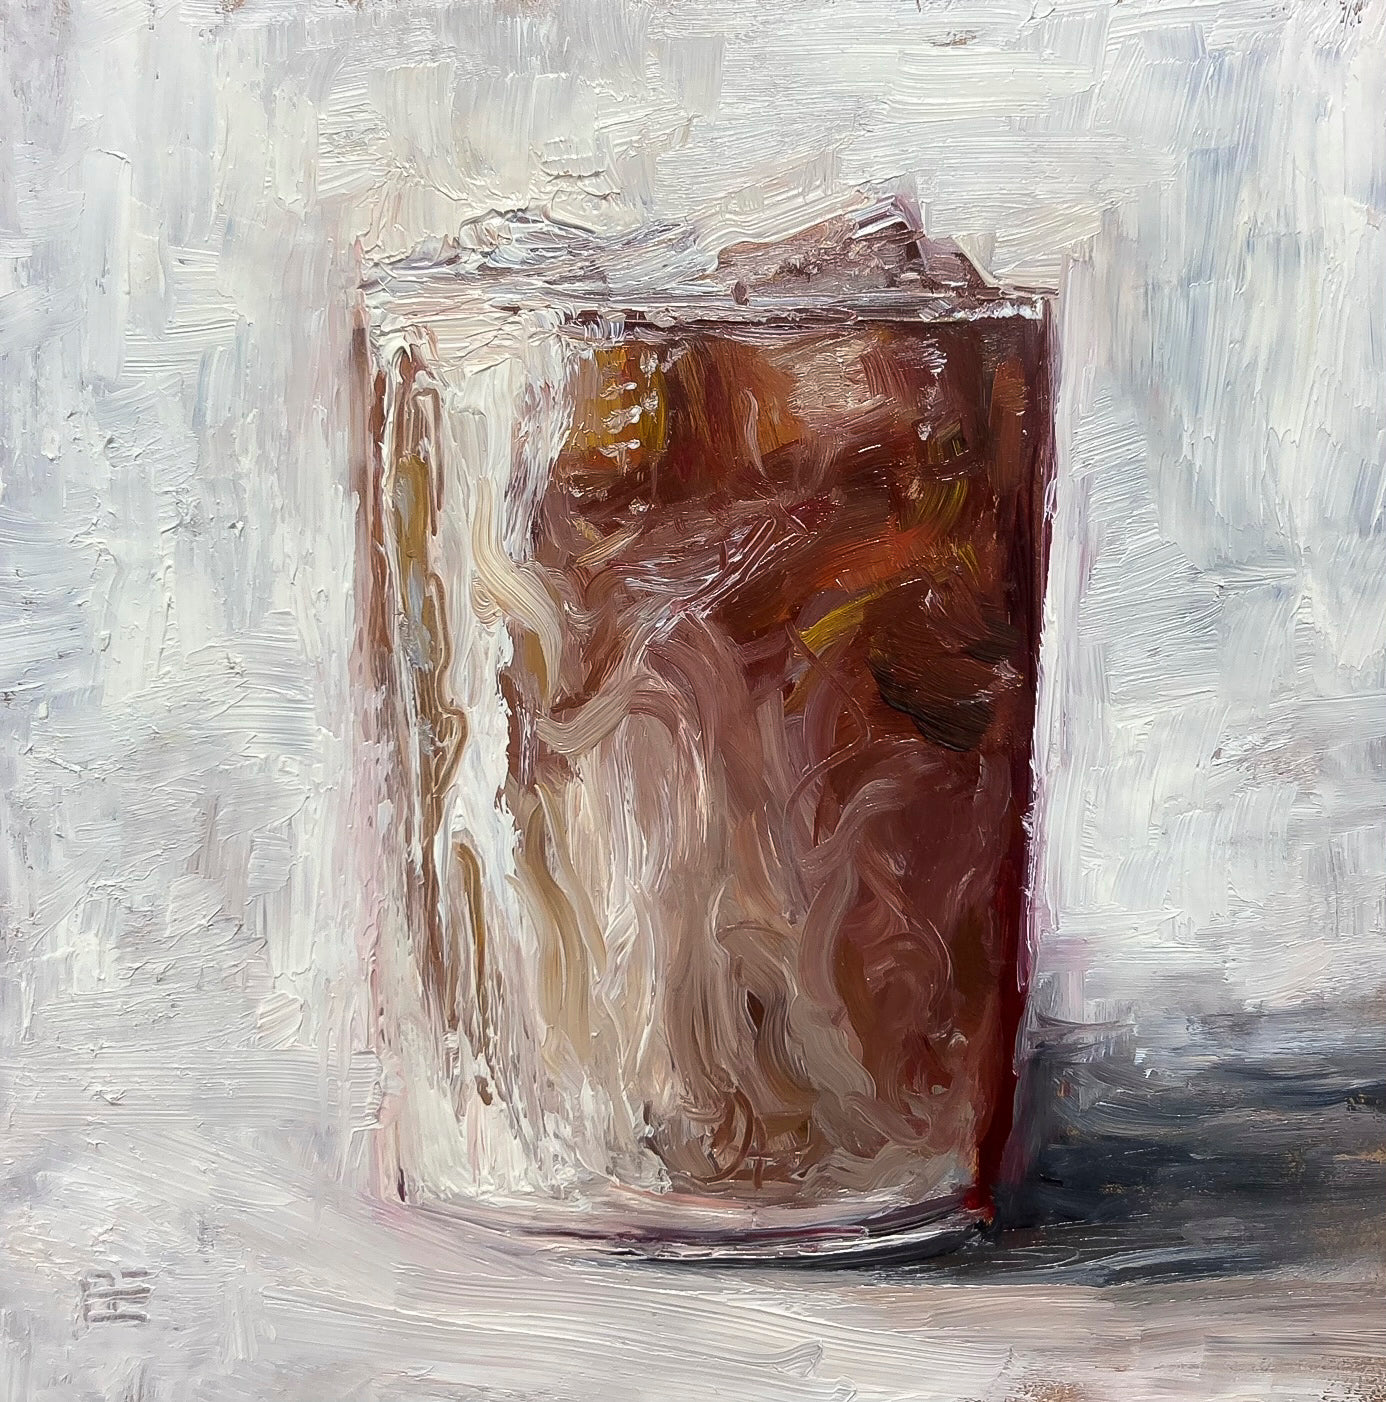 Oil painting of iced Oil painting of iced Oil painting of iced beverage by E. E. Jacks titled Afternoon